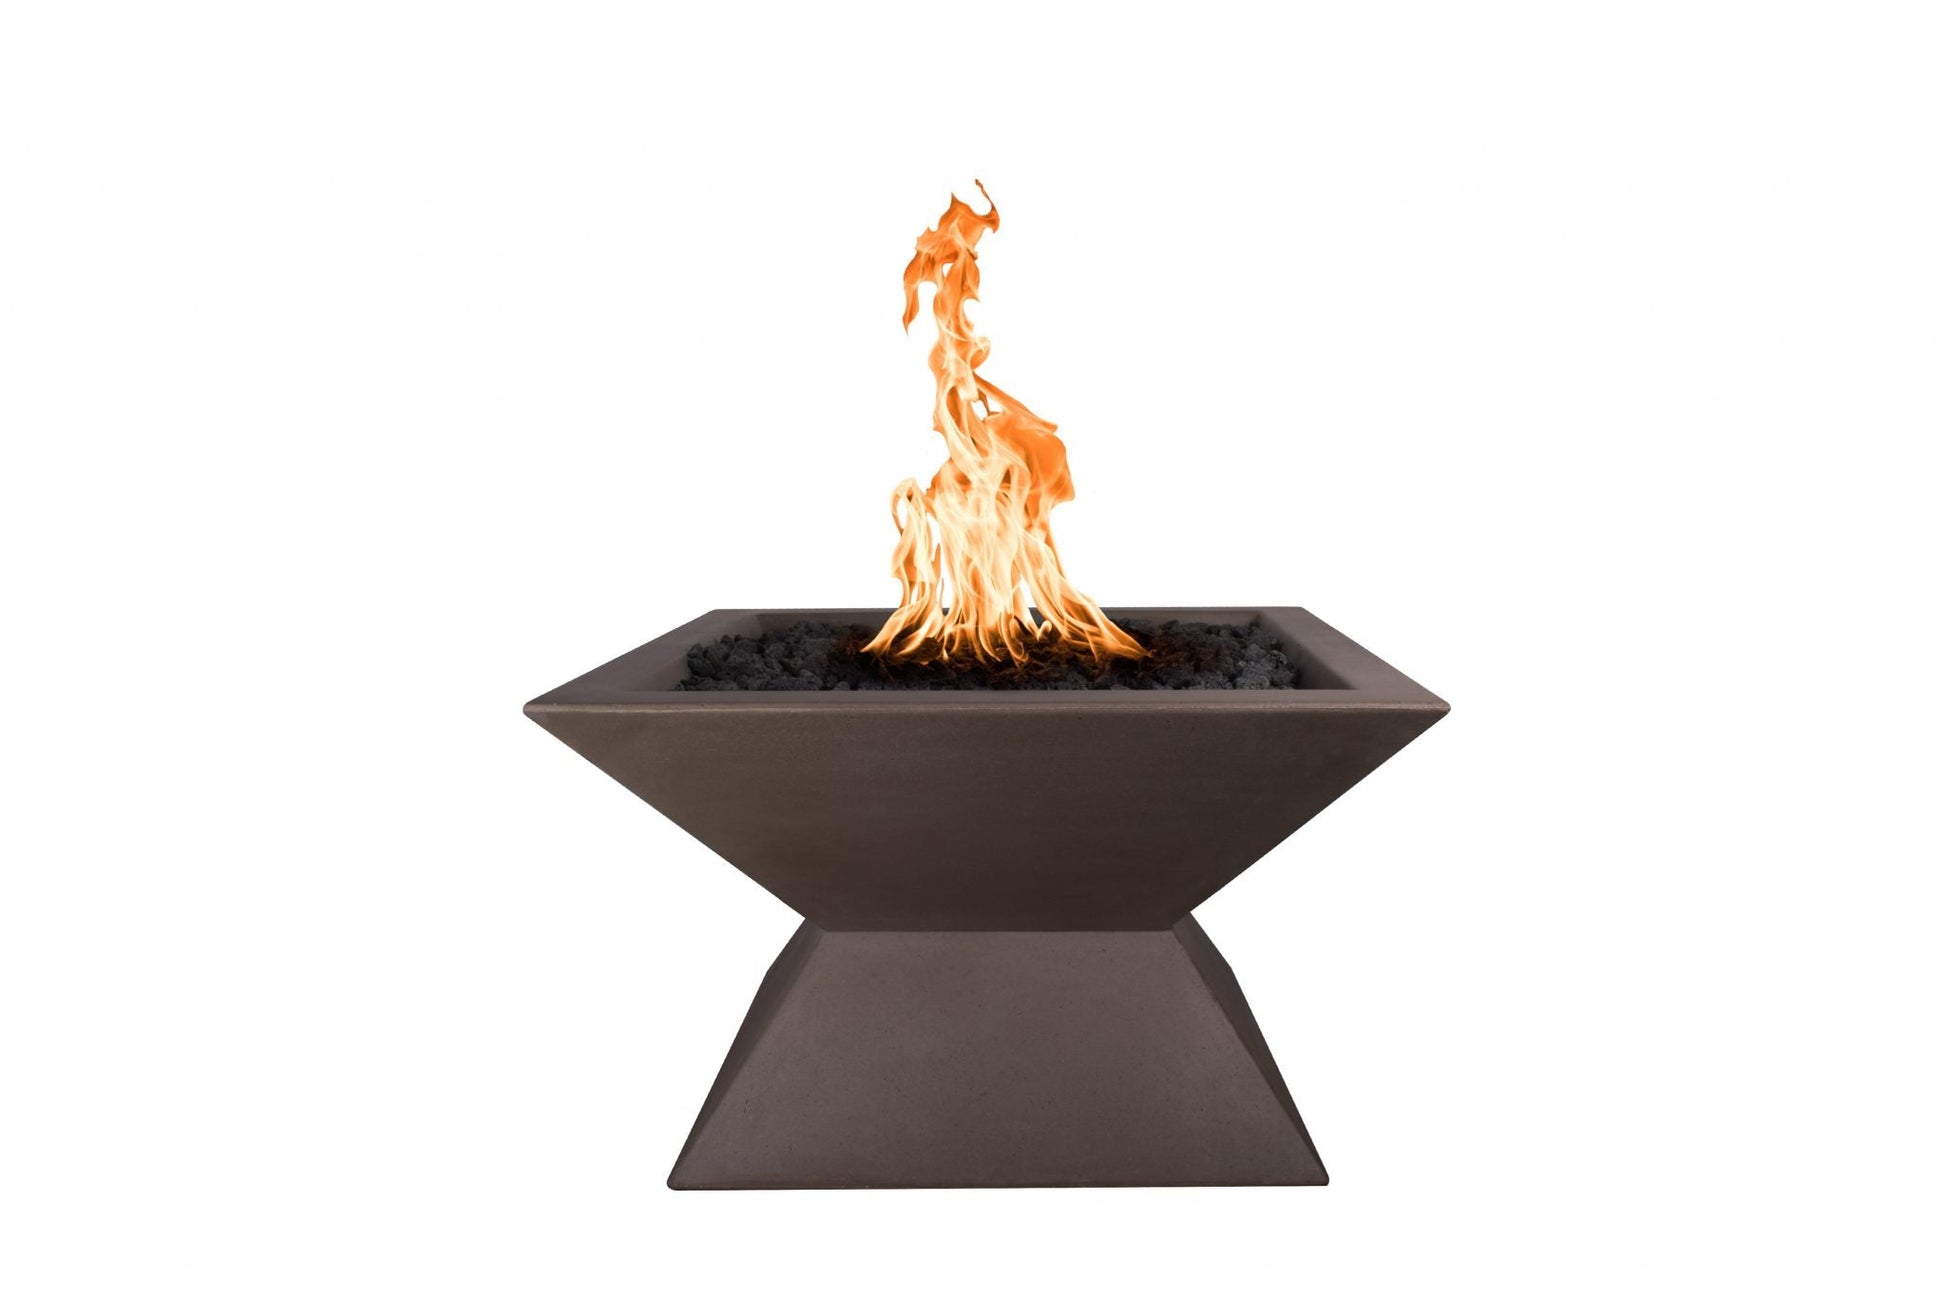 The Outdoor Plus Square Uxmal 30" Hammered Copper Liquid Propane Fire Pit with Match Lit Ignition